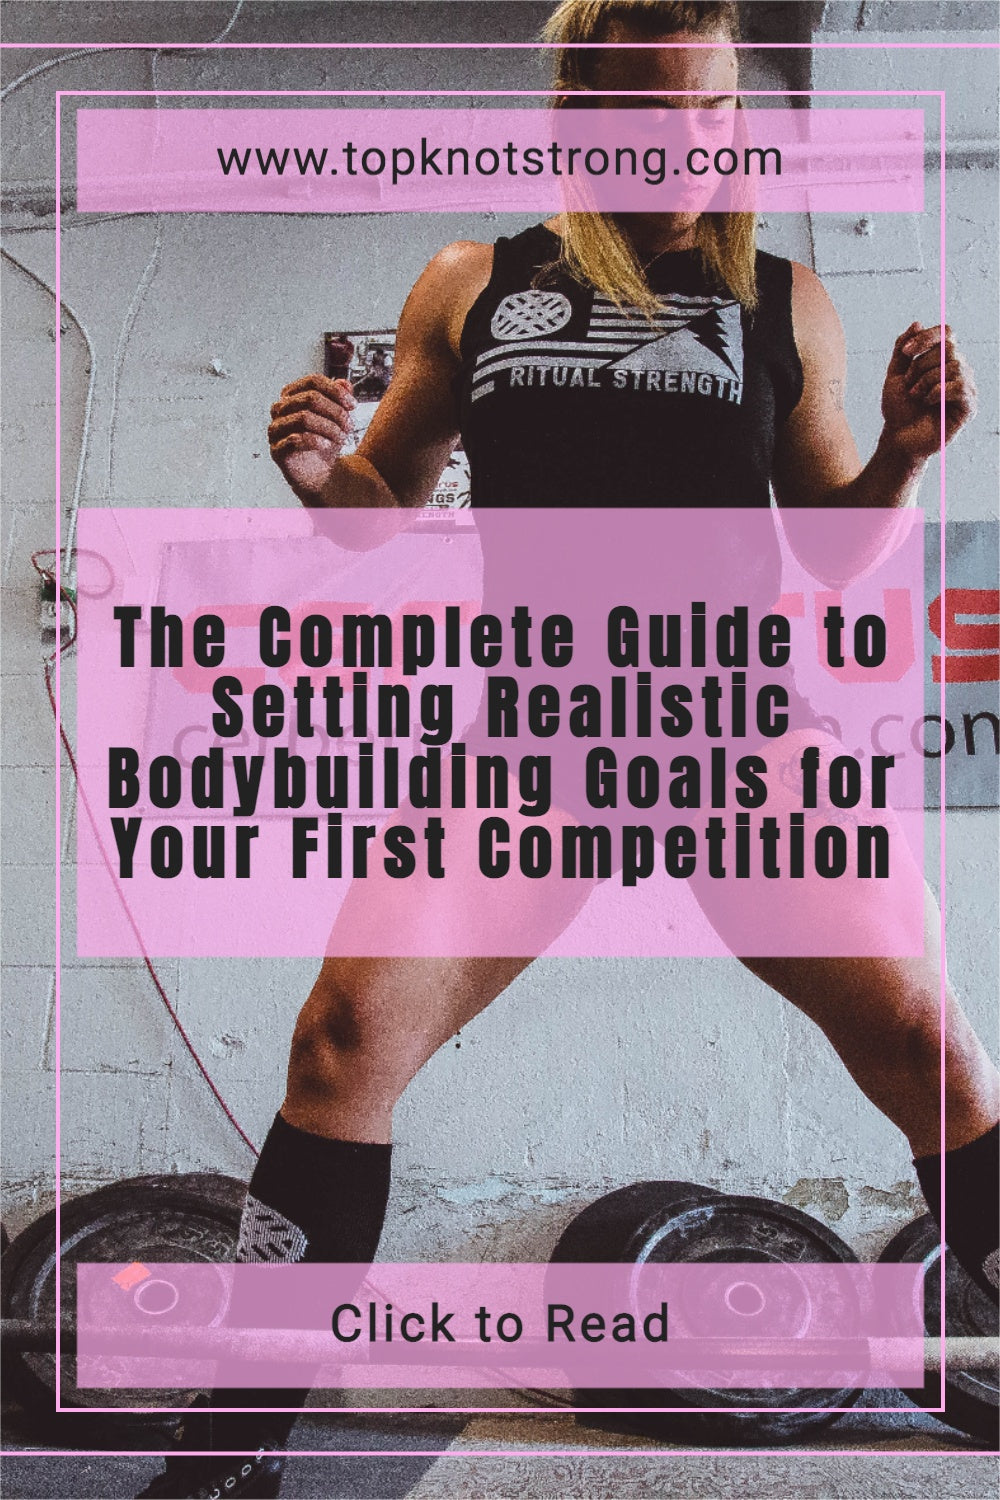 The Complete Guide to Setting Realistic Bodybuilding Goals for Your First Competition